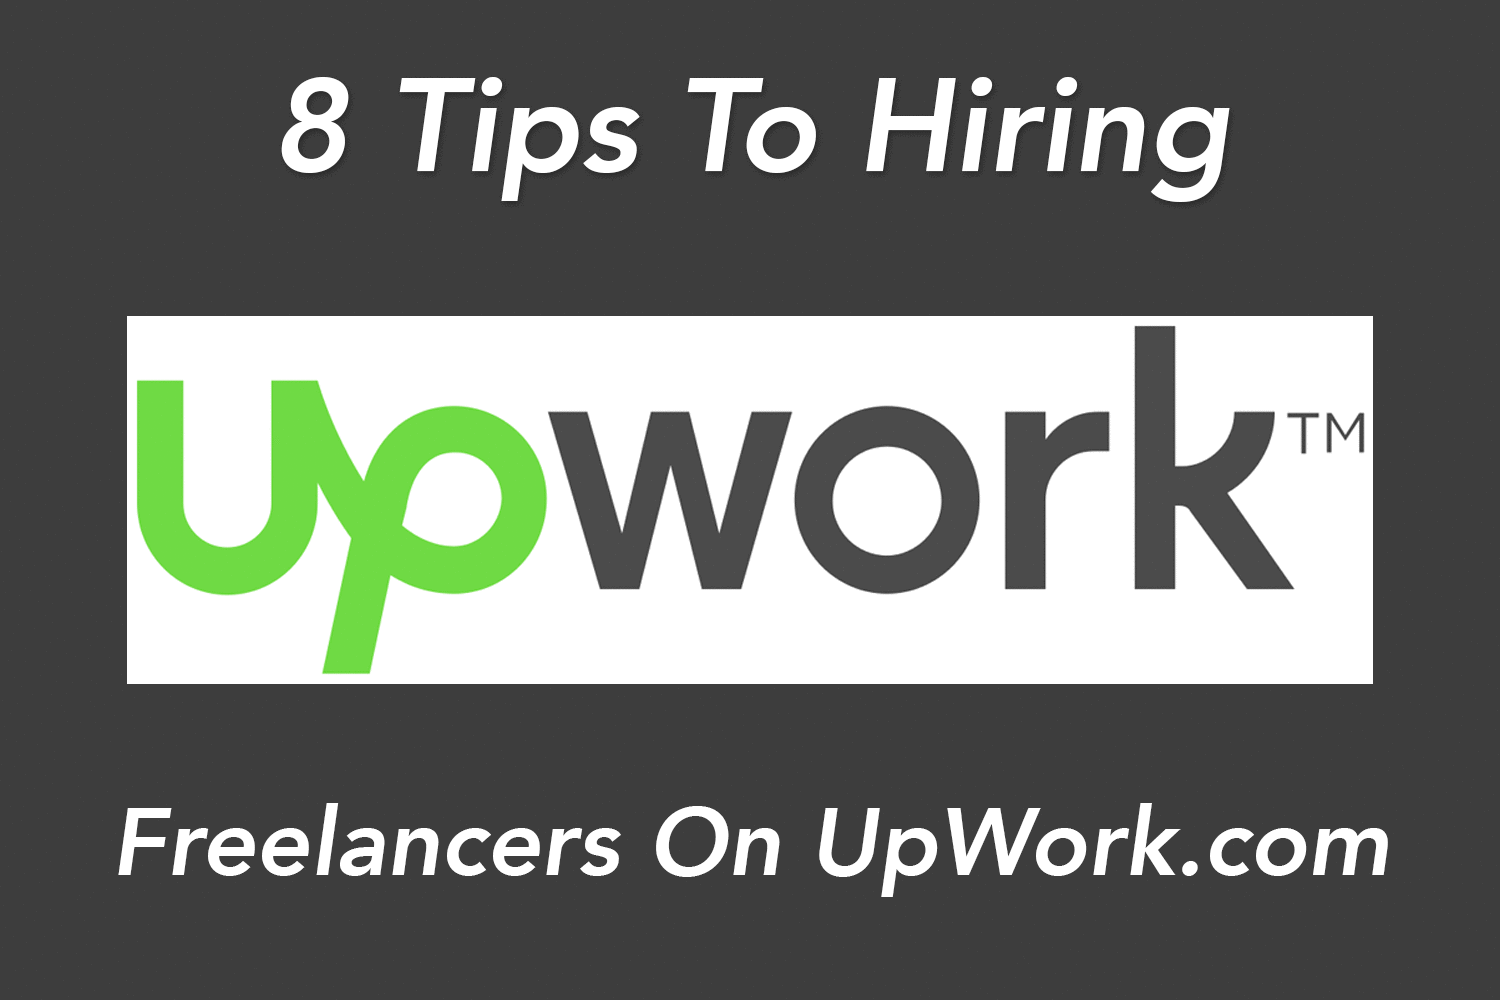 8 Tips To Hiring Your First Freelancer on UpWork.com